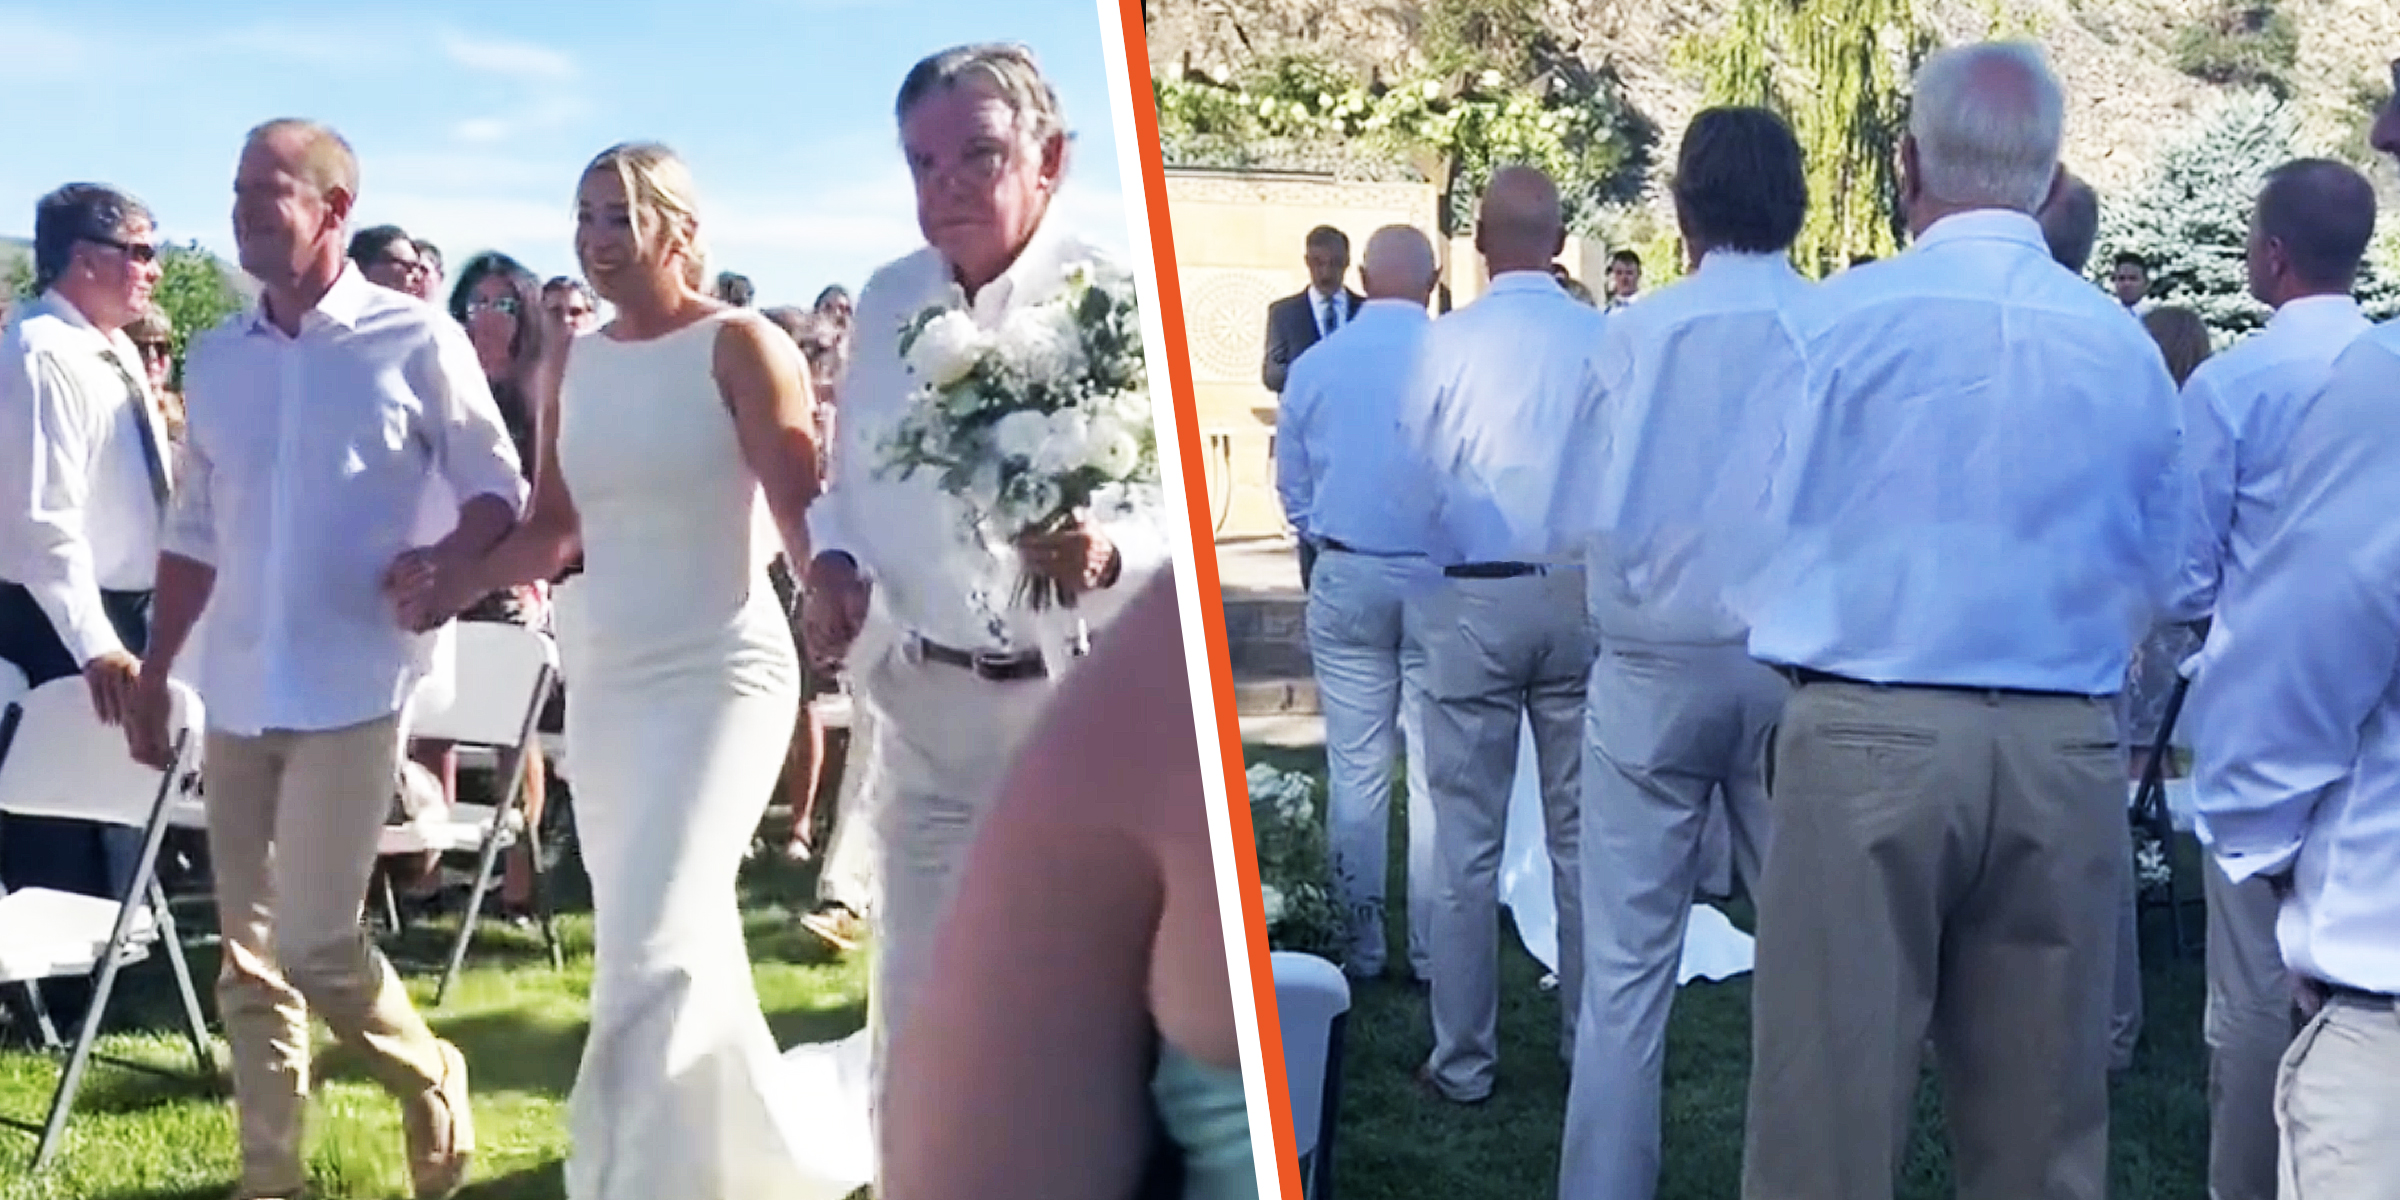 Ivy Jacobsen Being Walked Down The Aisle By the Important Men in Her Life, 2023 | Source: TikTok.com/@karrahcreativeevents